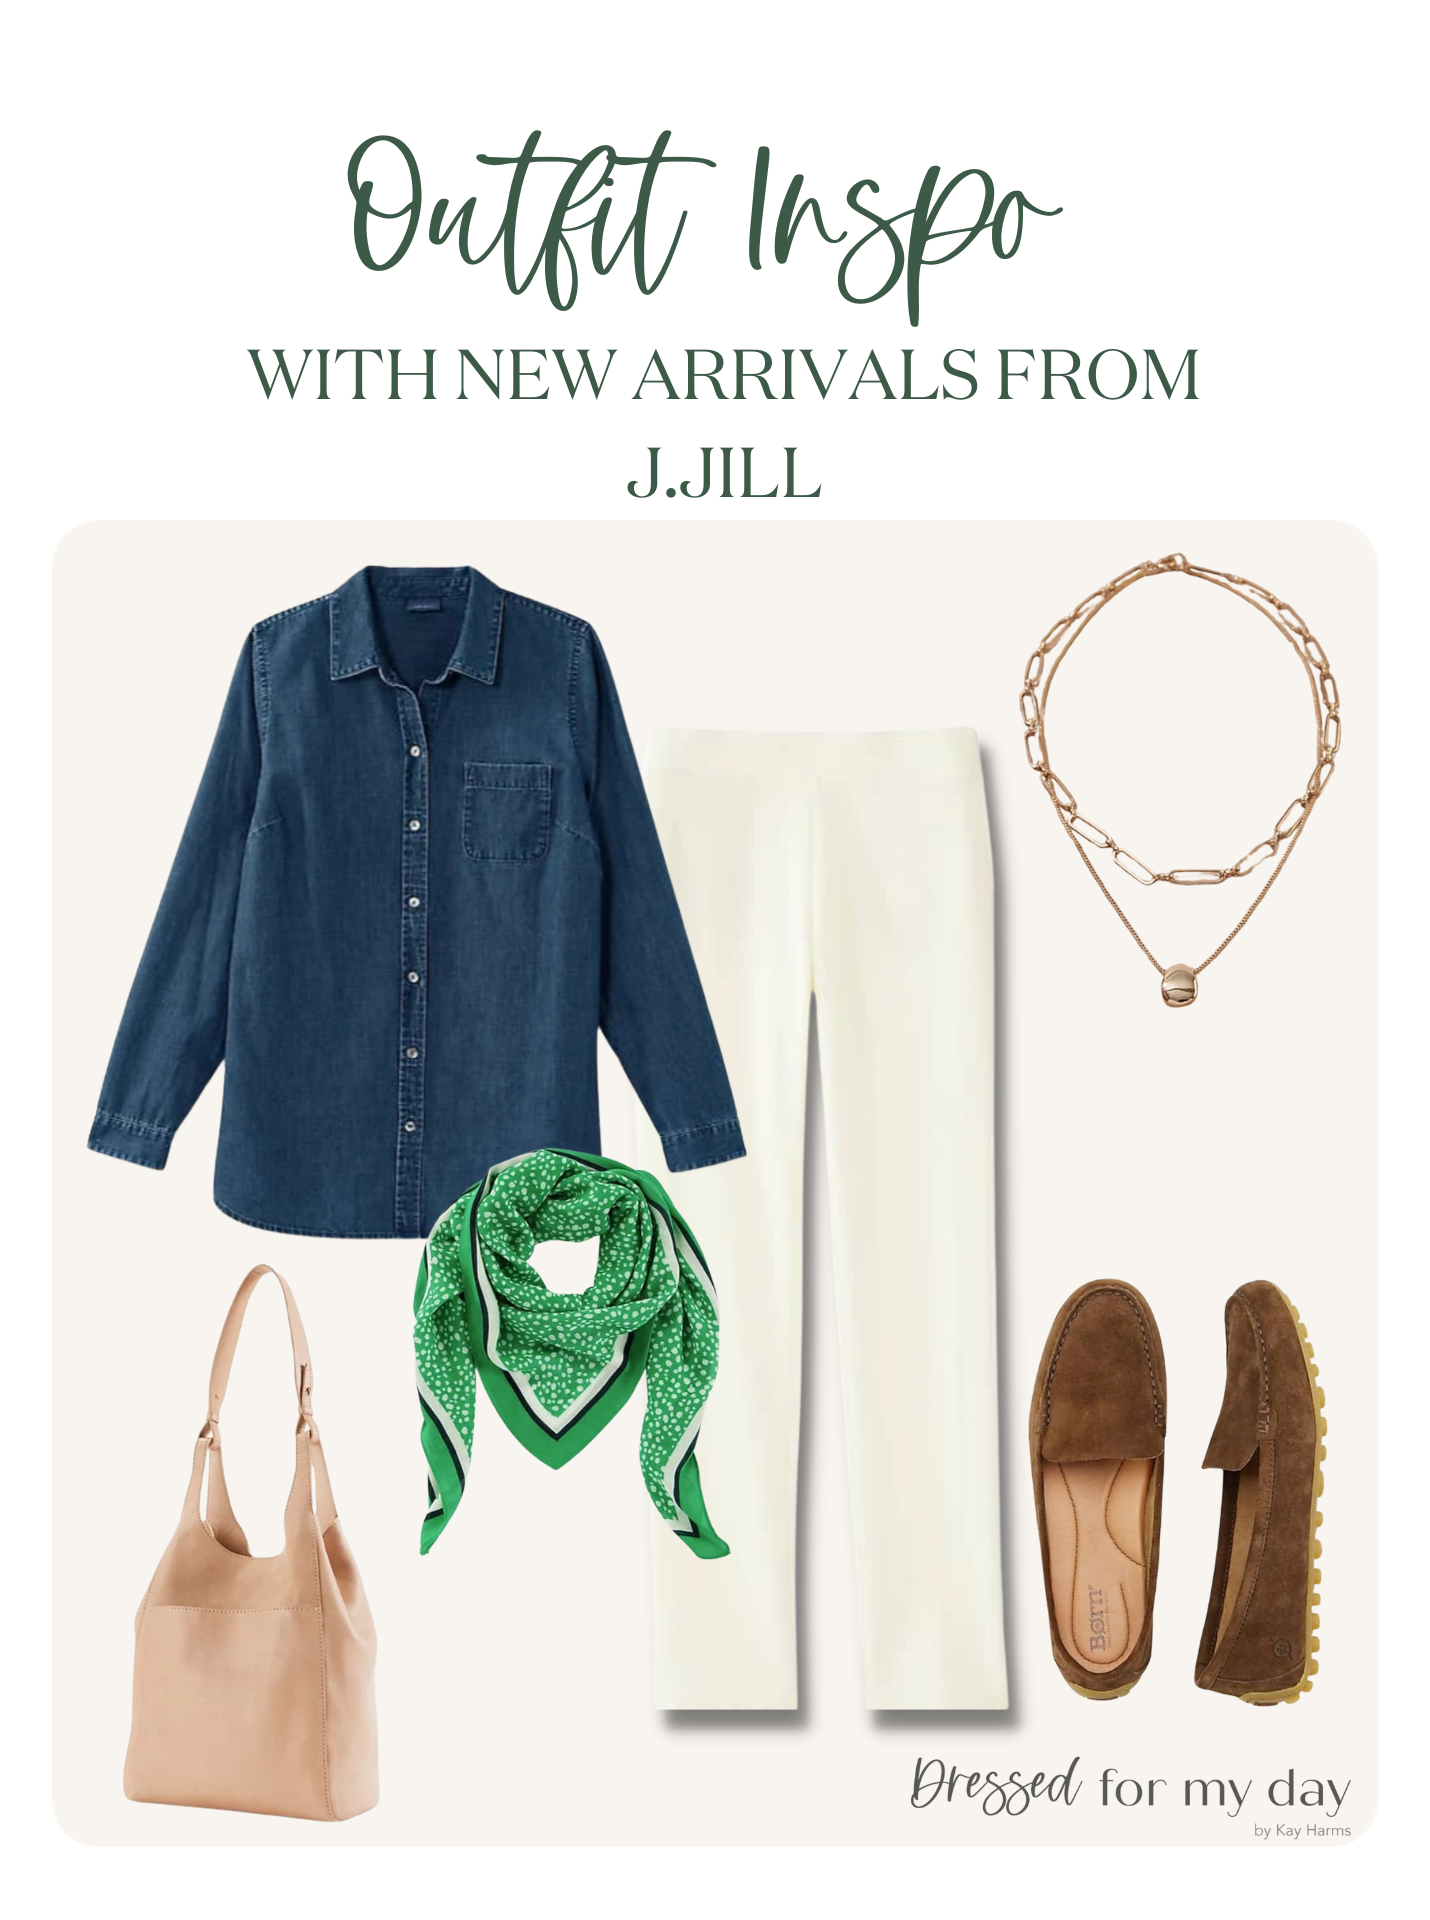 J.Jill - Simple outfits get such an upgrade when you add florals